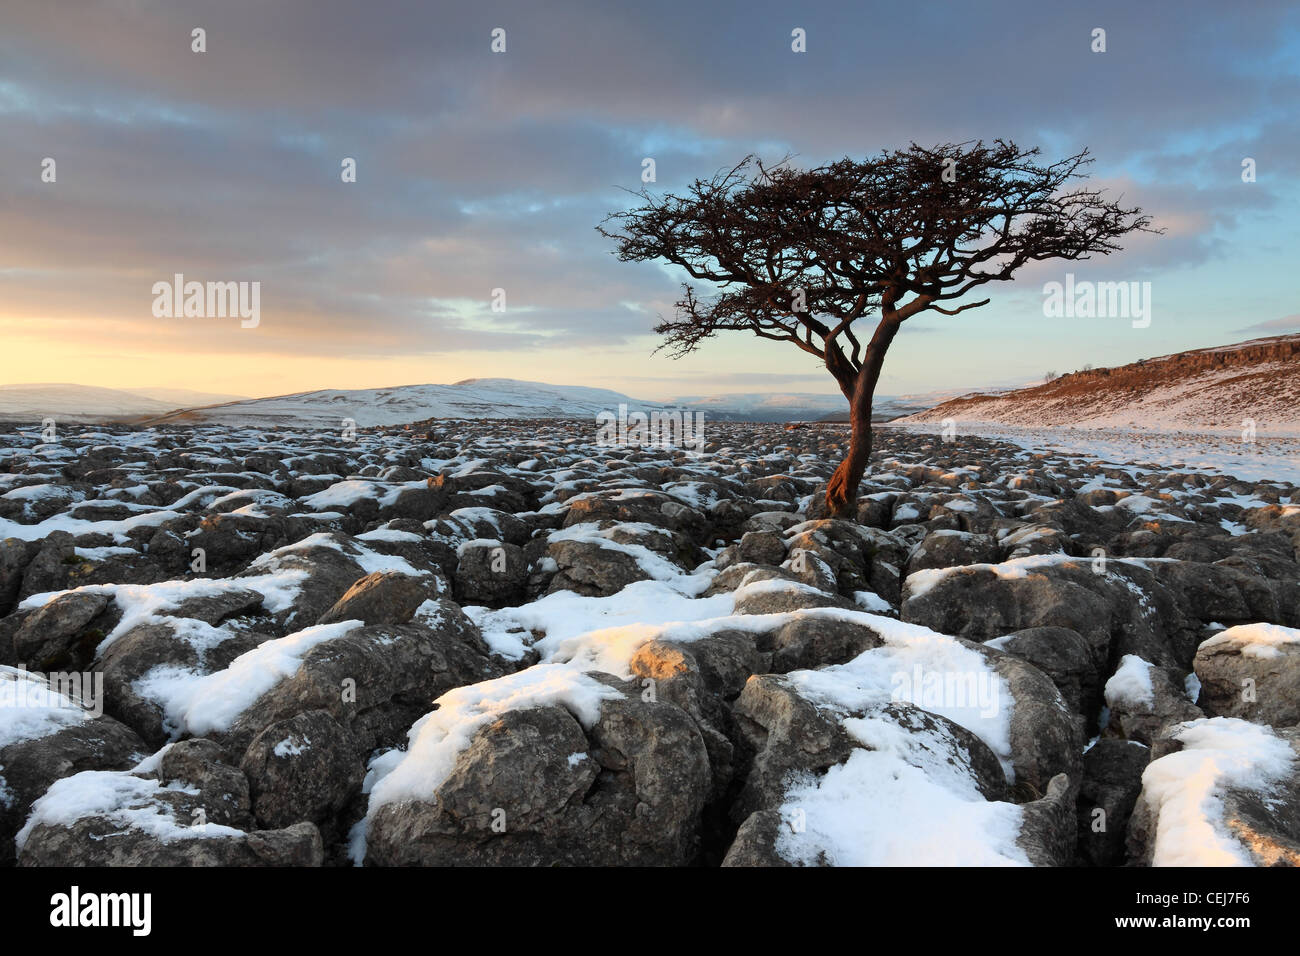 Snow covers the limestone pavement near Conistone in Upper-Wharfedale, in the Yorkshire Dales National Park, England Stock Photo